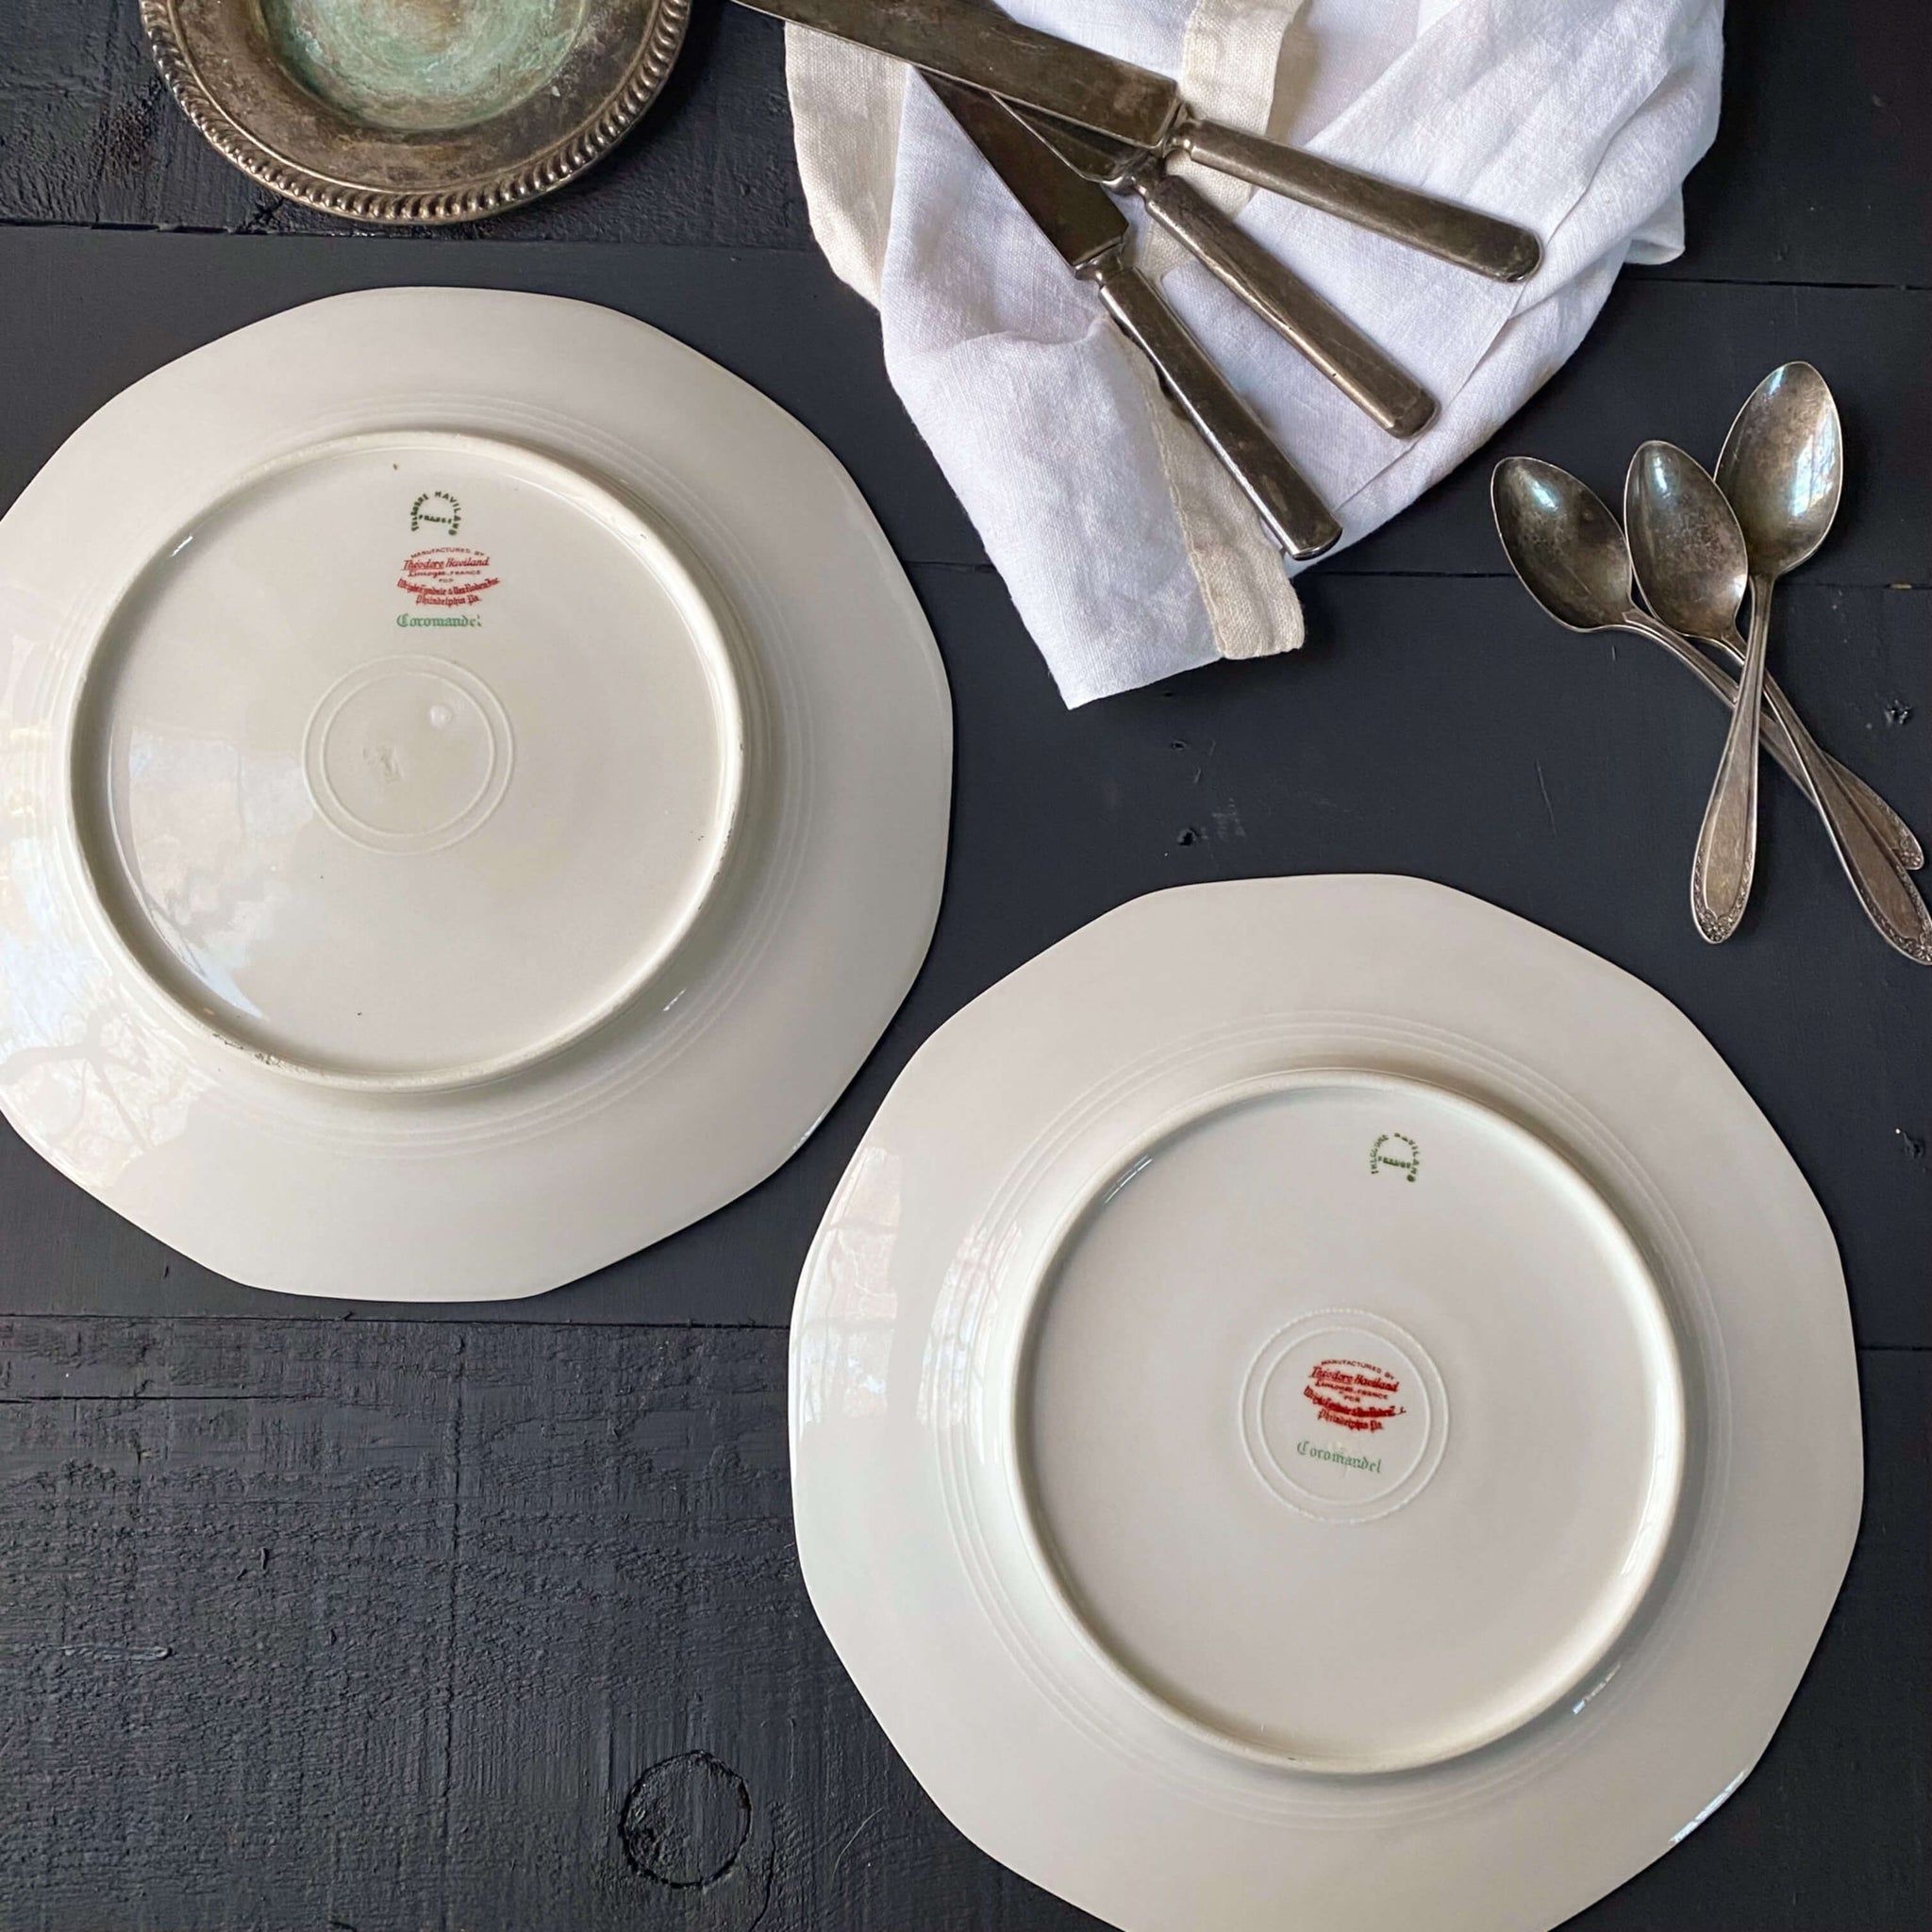 Antique Theodore Haviland Coromandel Porcelain Dinner Plates - Set of Two - Imported to Wright, Tyndale and Van Roden, Philadelphia circa 1920s